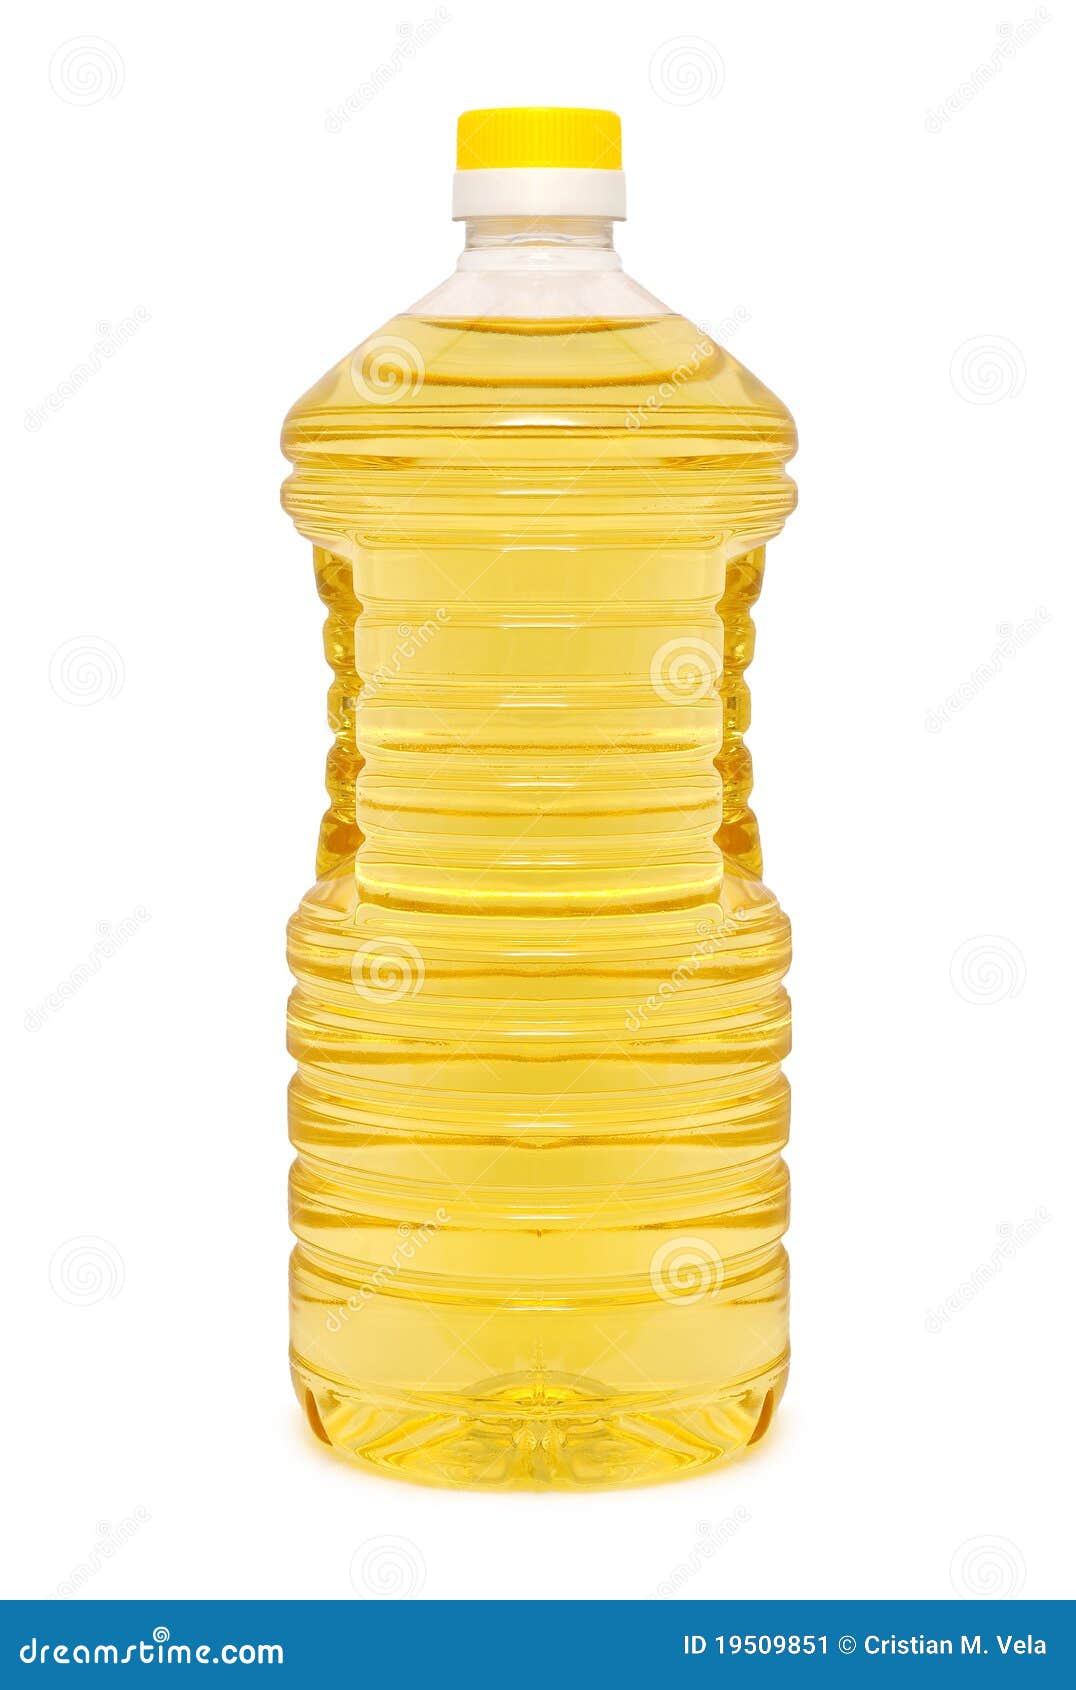 cooking oil clipart - photo #6